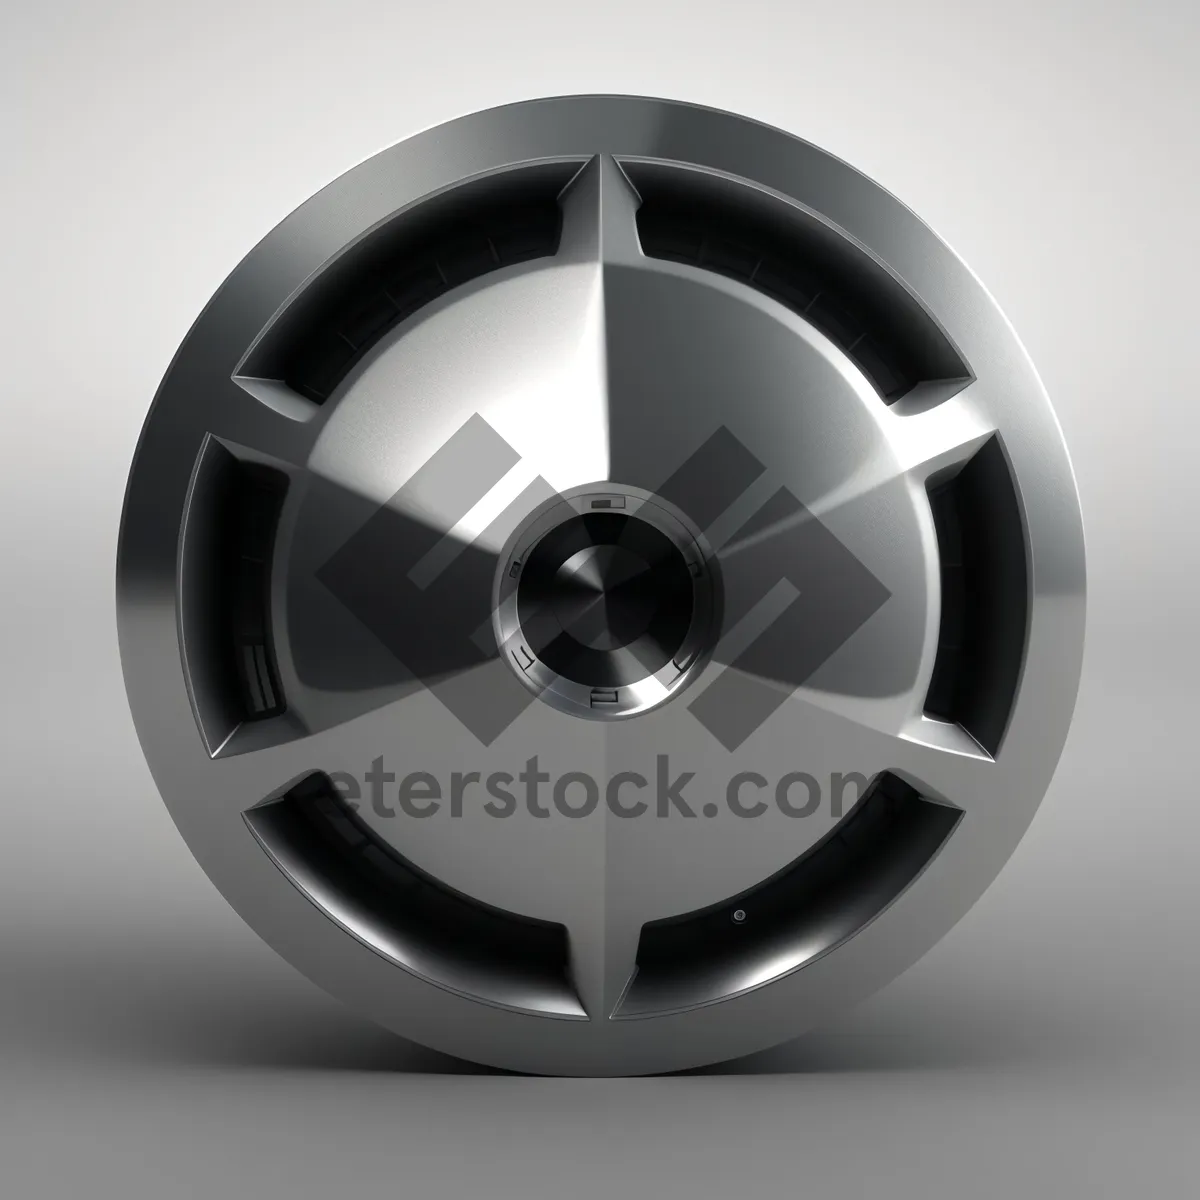 Picture of Shiny Metallic Nuclear Symbol Button